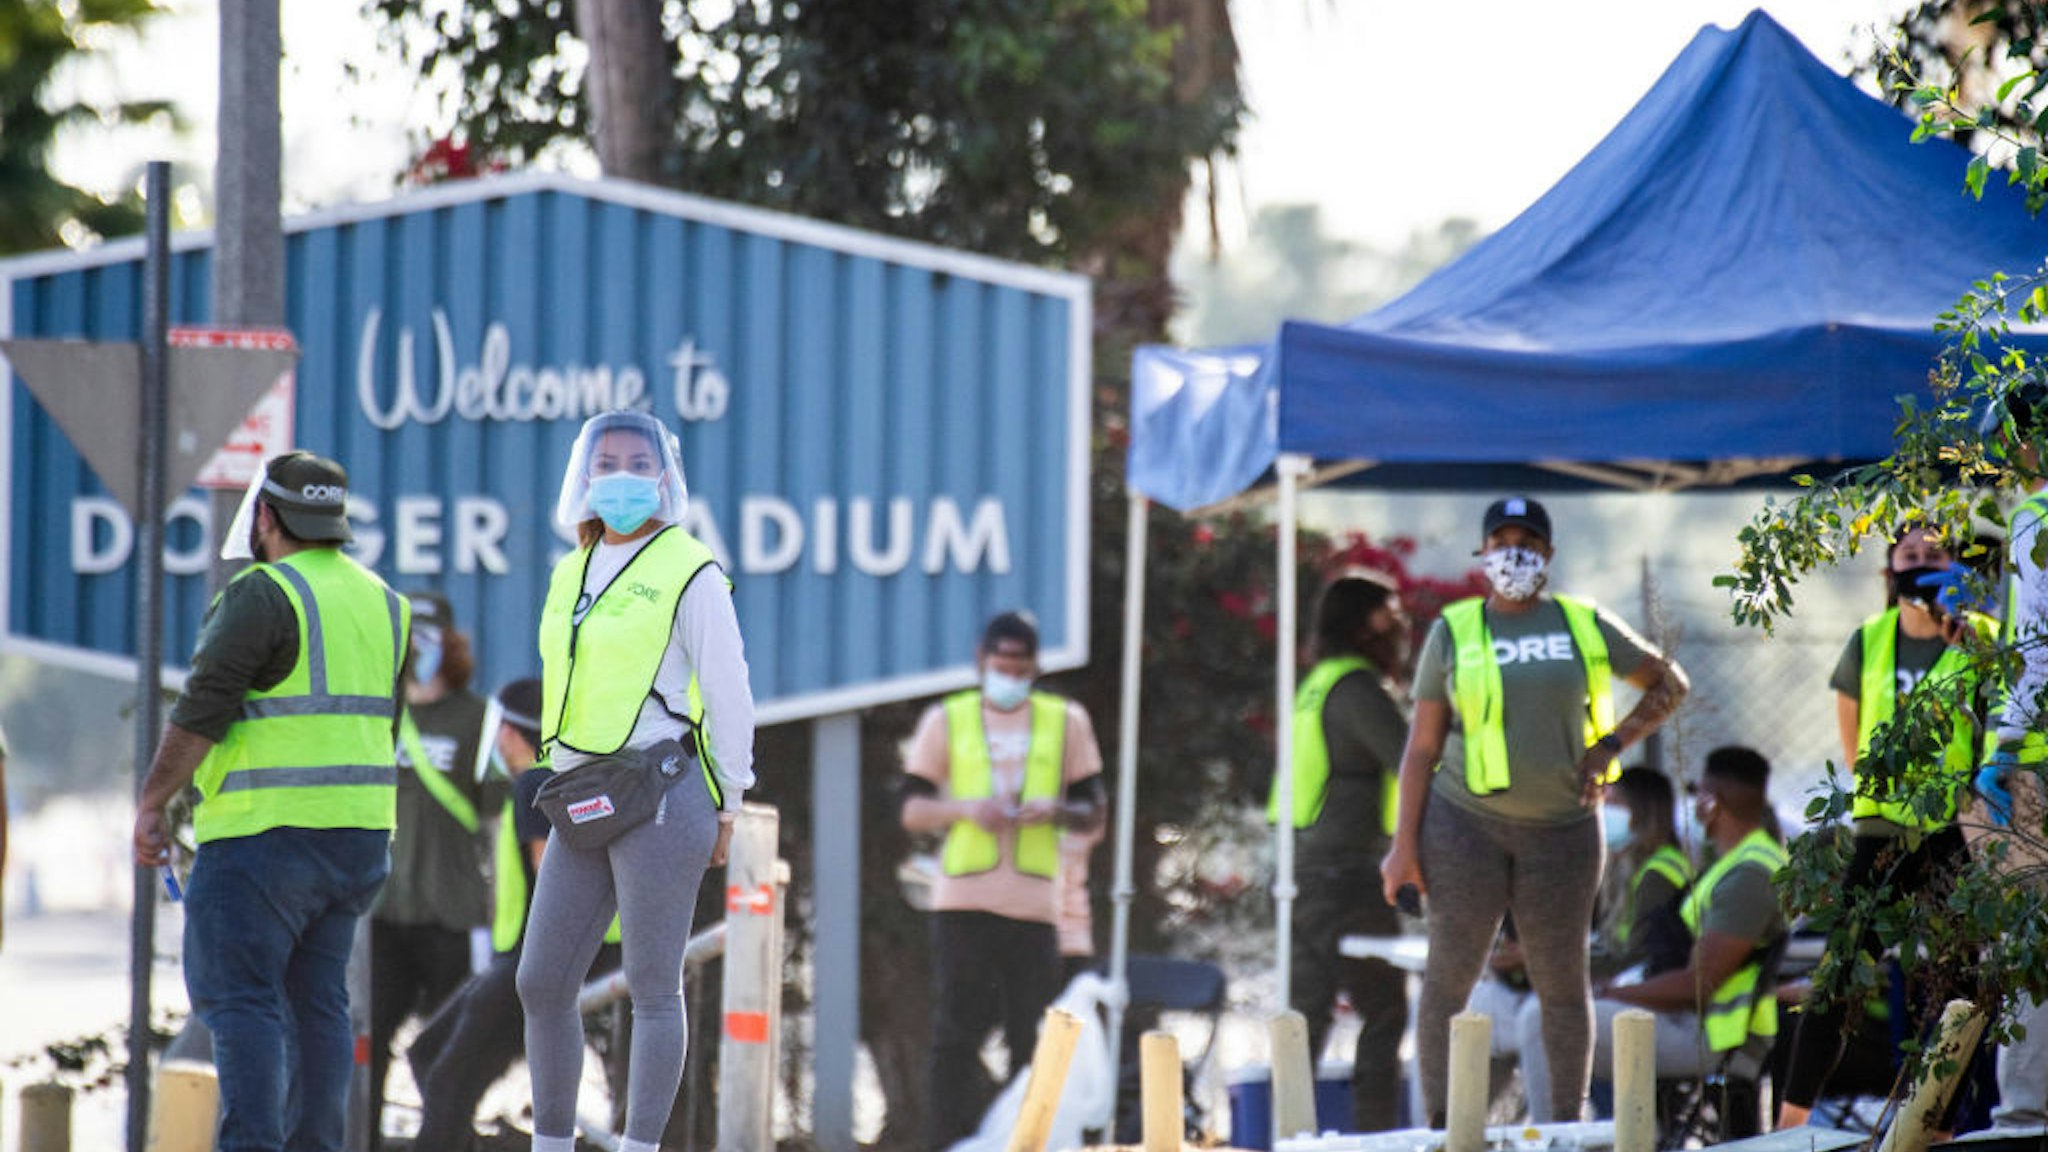 LOS ANGELES, CA - JANUARY 15: CORE employees are on hand to direct traffic at Dodger Stadium in Los Angeles after it was turned into a COVID-19 drive-thru vaccination site on Friday, January 15, 2021.